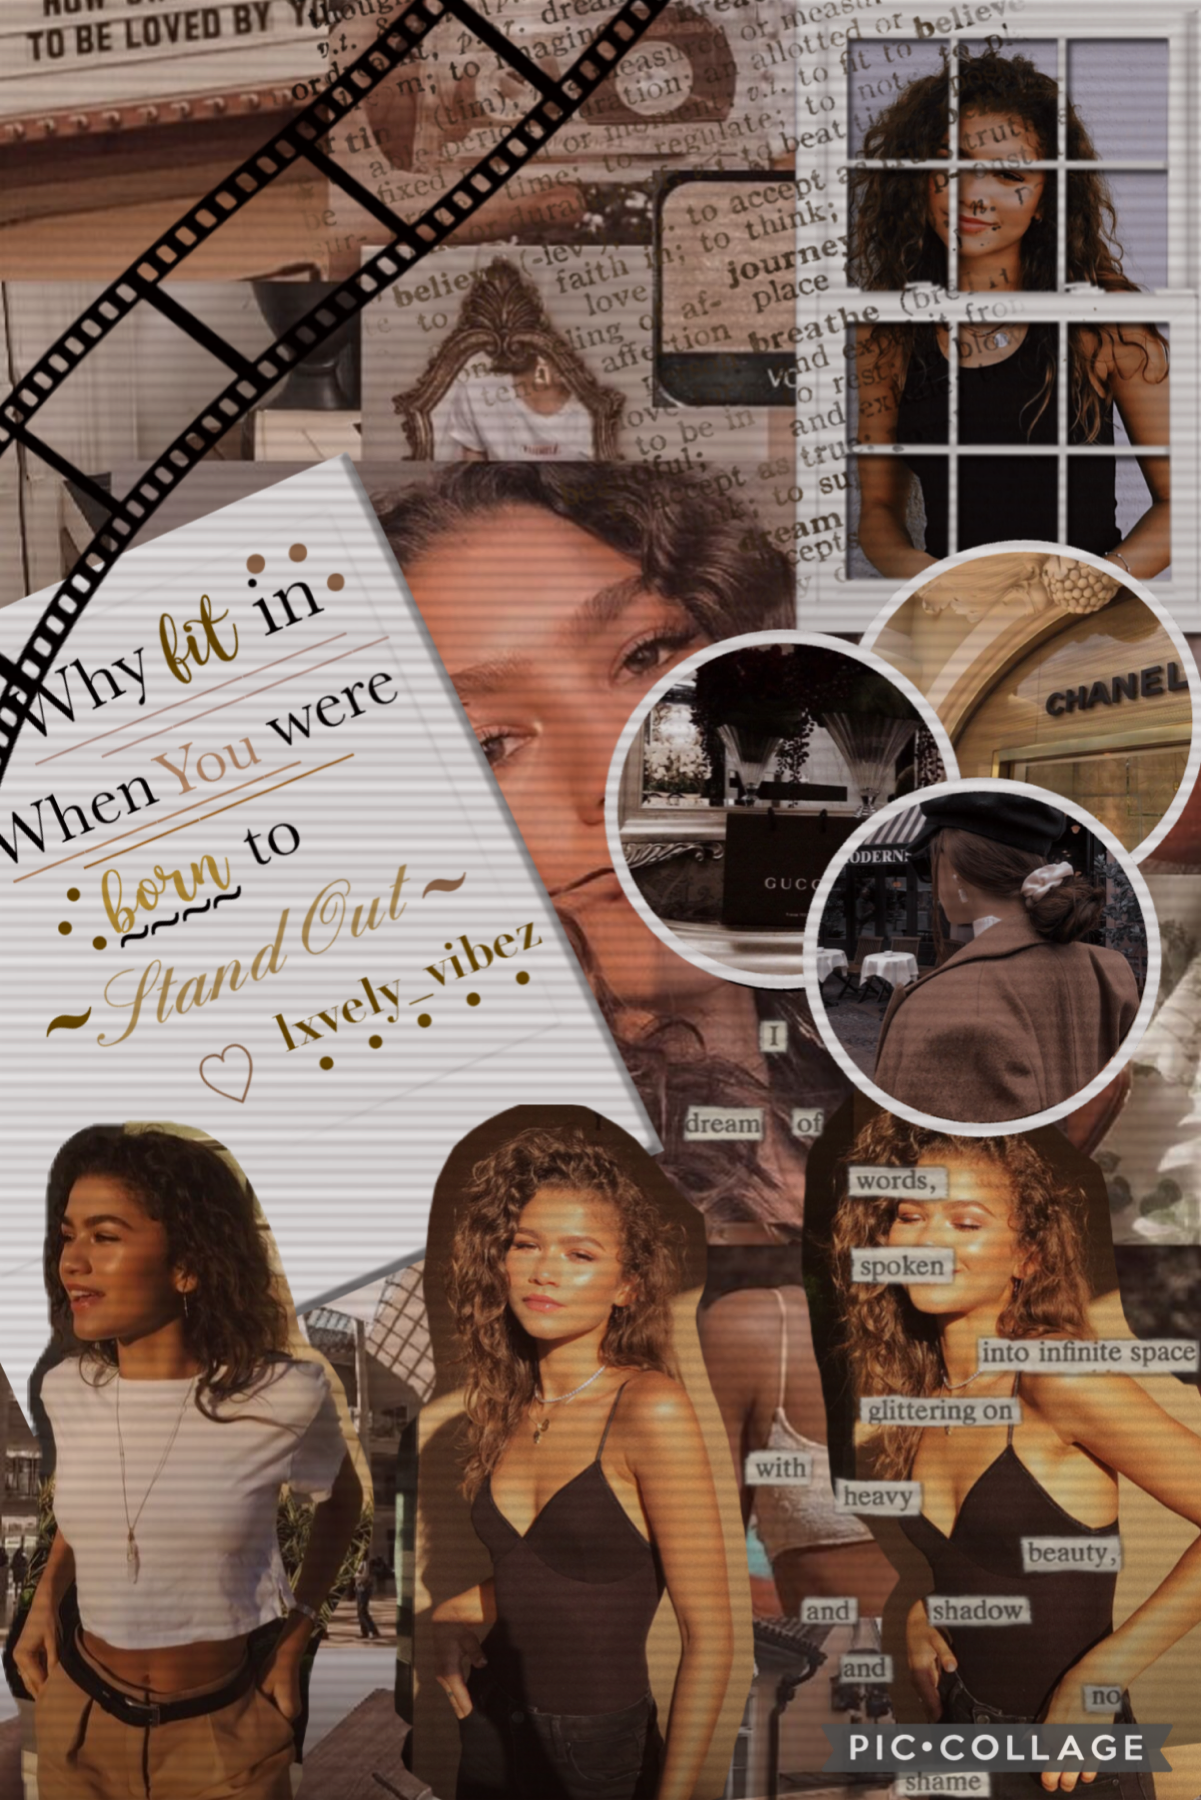 Zendaya Beige Vouge Aesthetic 🤎

What’s your favourite movie/show or song by Zendaya? 